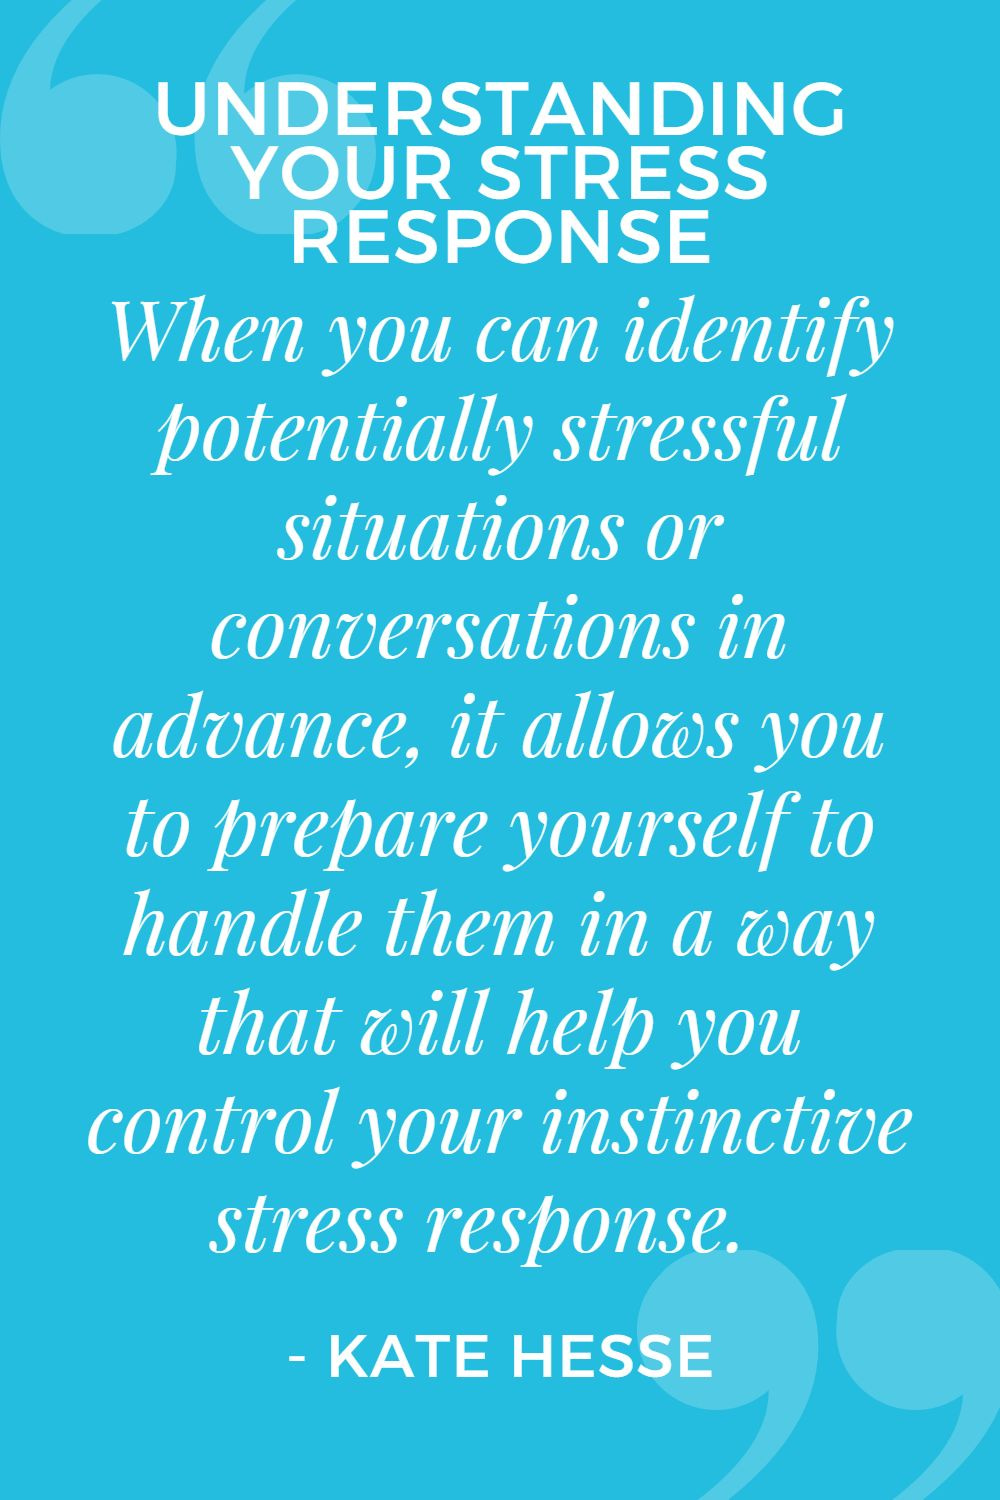 When you can identify potentially stressful situations or conversations in advance, it allows you to prepare yourself to handle them in a way that will help you control your instinctive stress response.